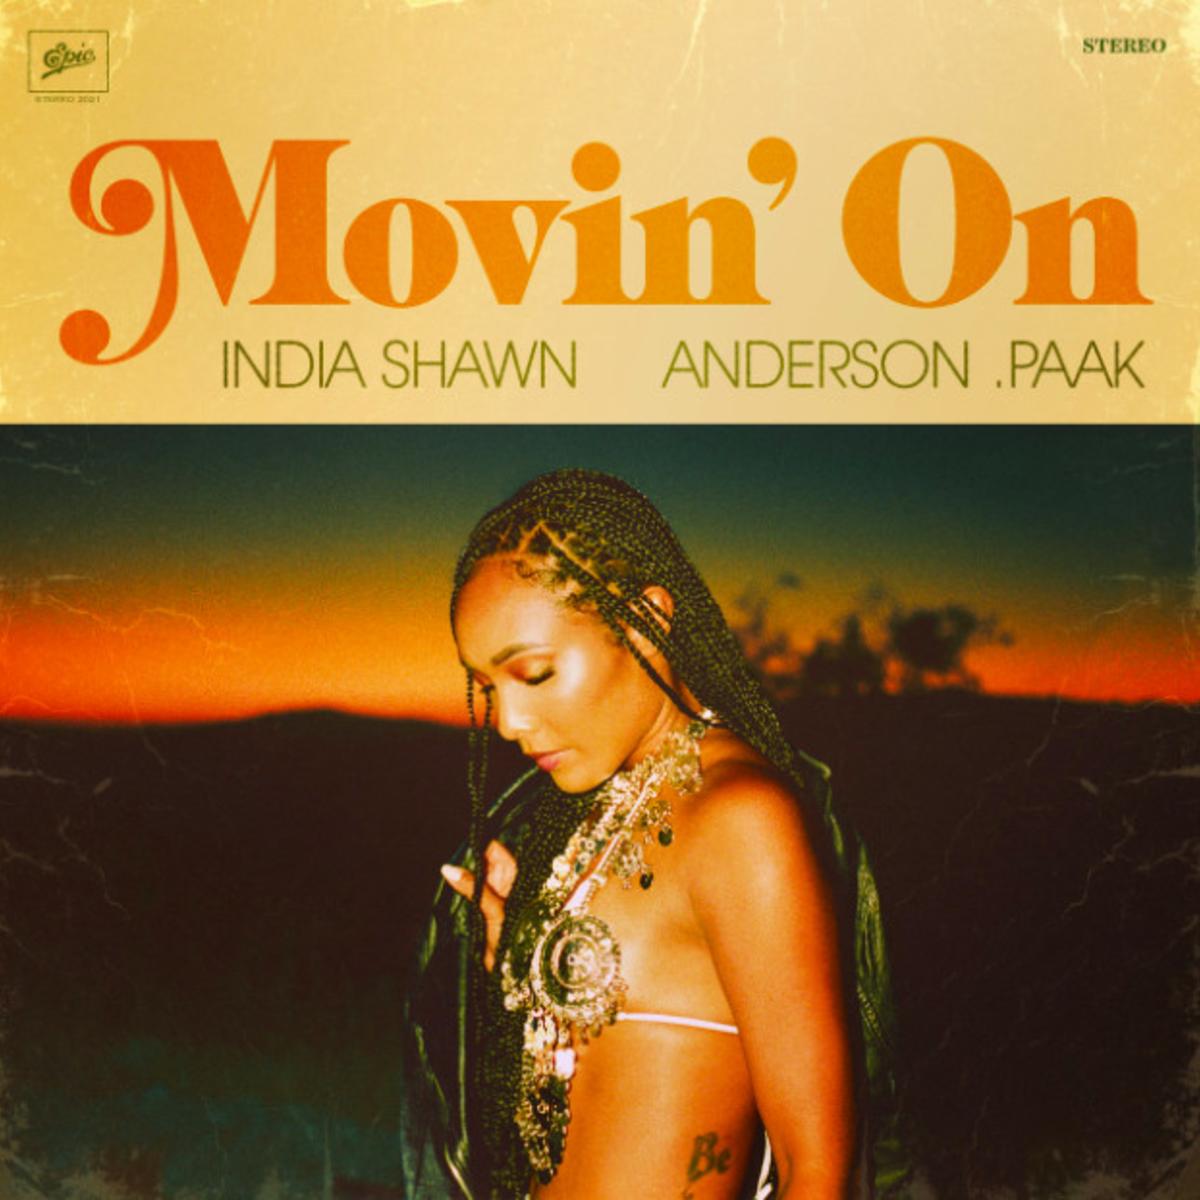 India Shawn Releases “Movin’ On” With Anderson . Paak